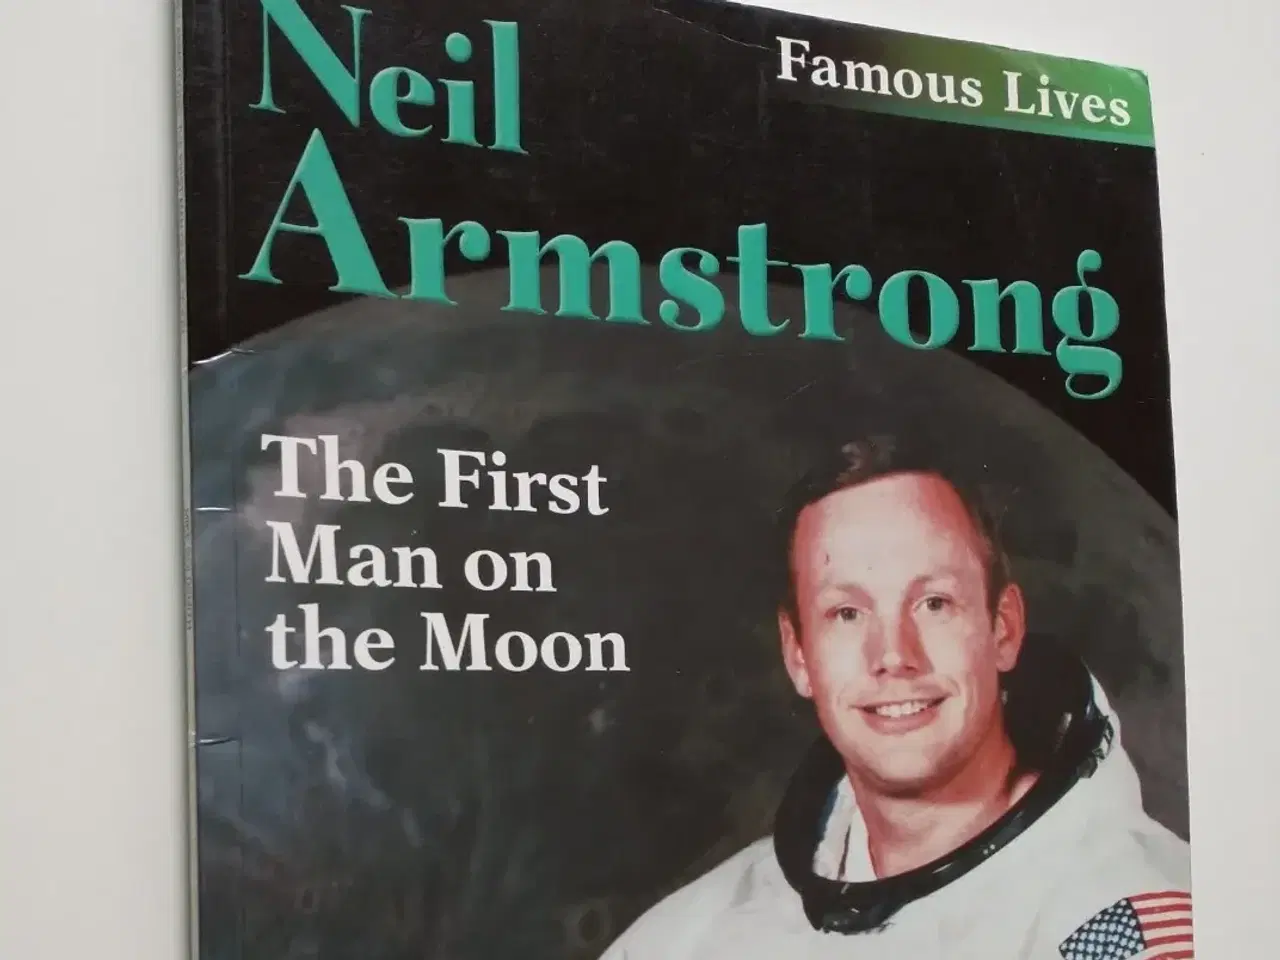 Billede 1 - Neil Armstrong - The First Man on the Moon